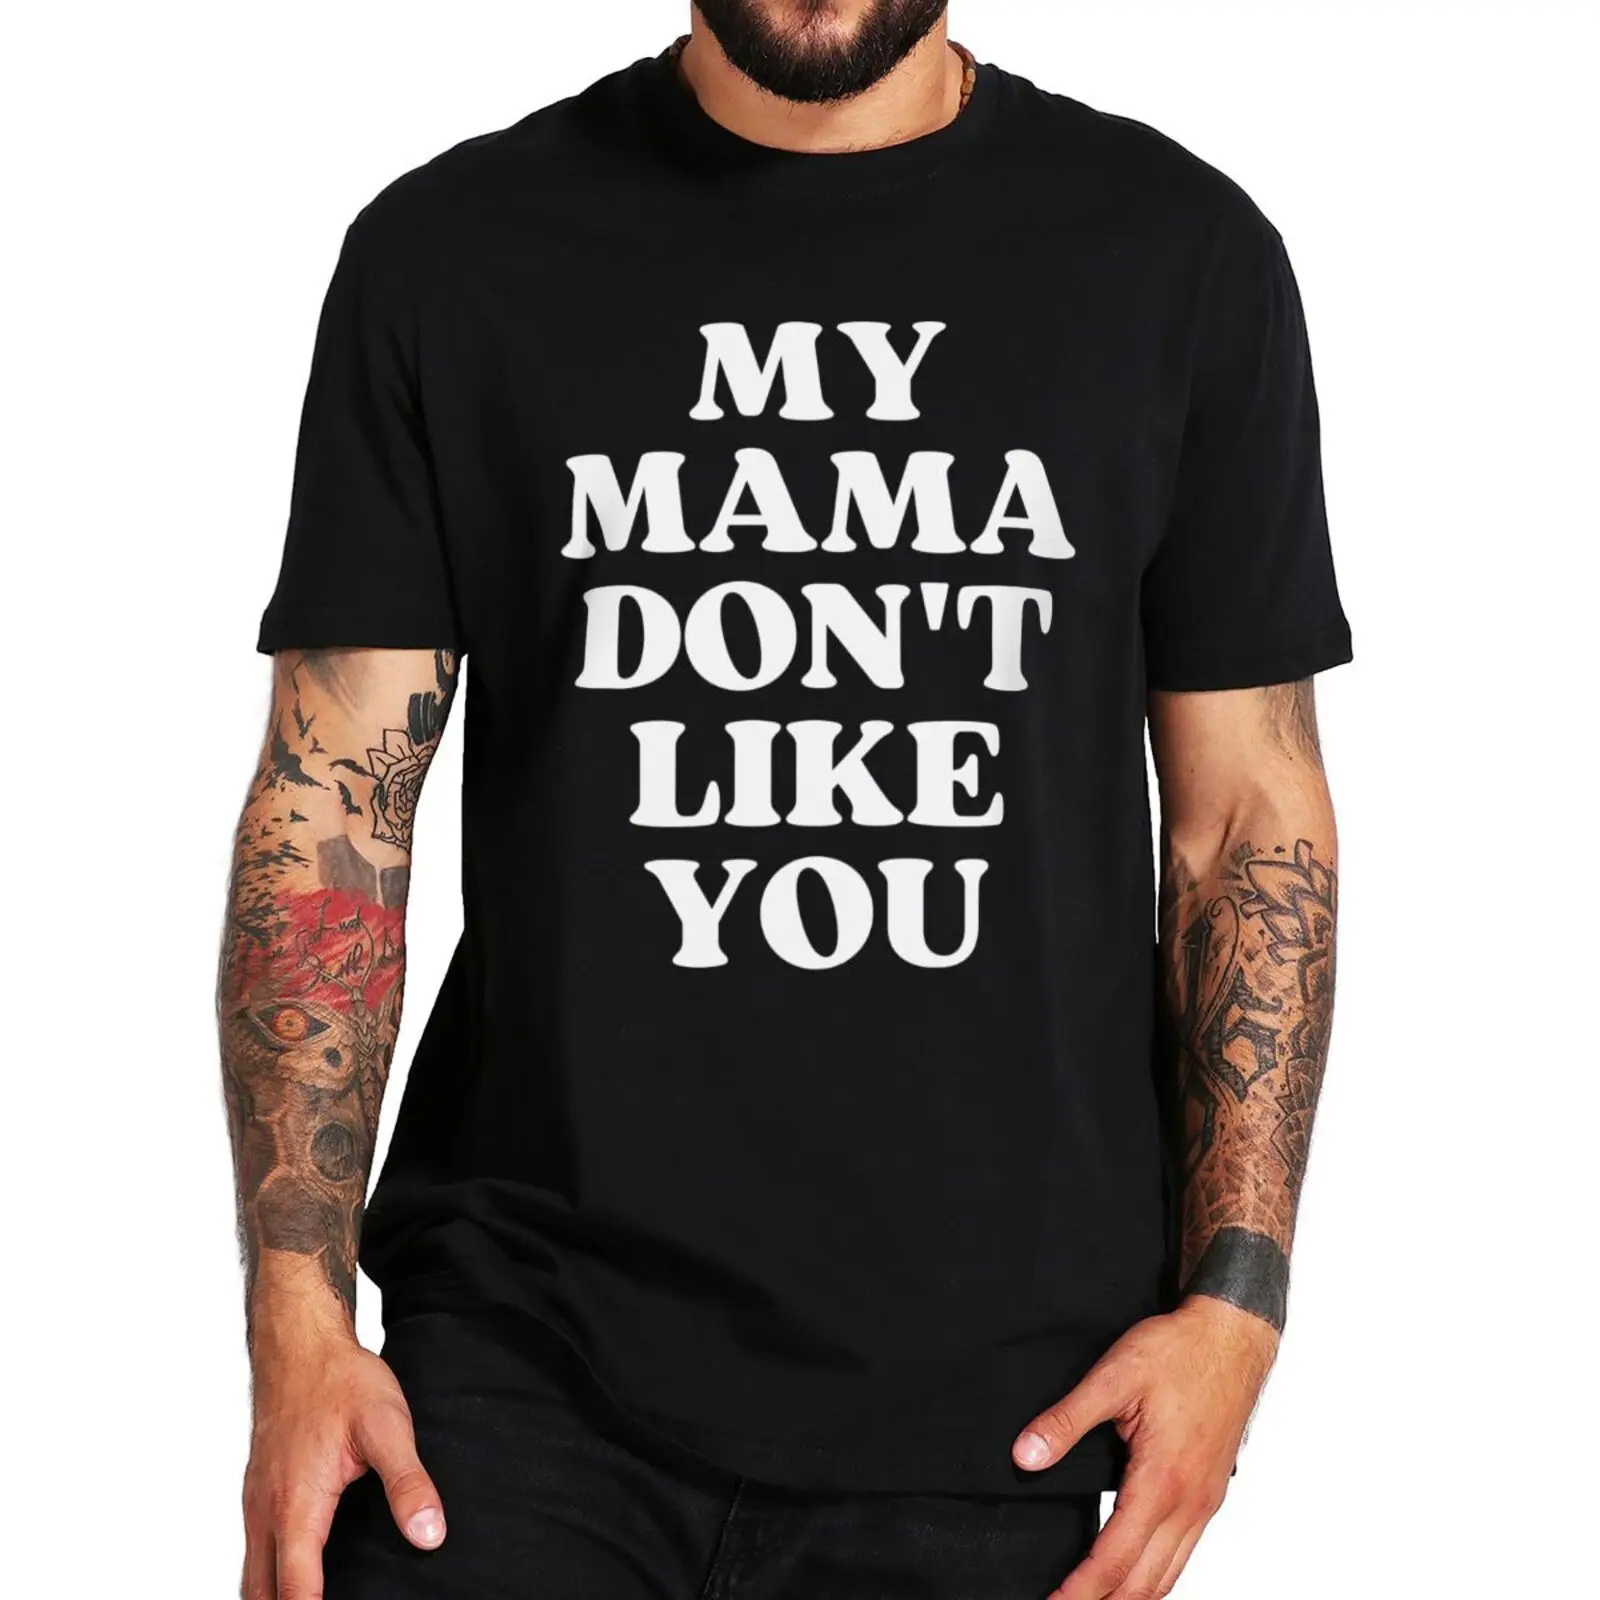 

My Mama Don't Like You T Shirt Funny Quotes Humor Jokes Streetwear O-neck 100% Cotton Unisex Summer T-shirts EU Size